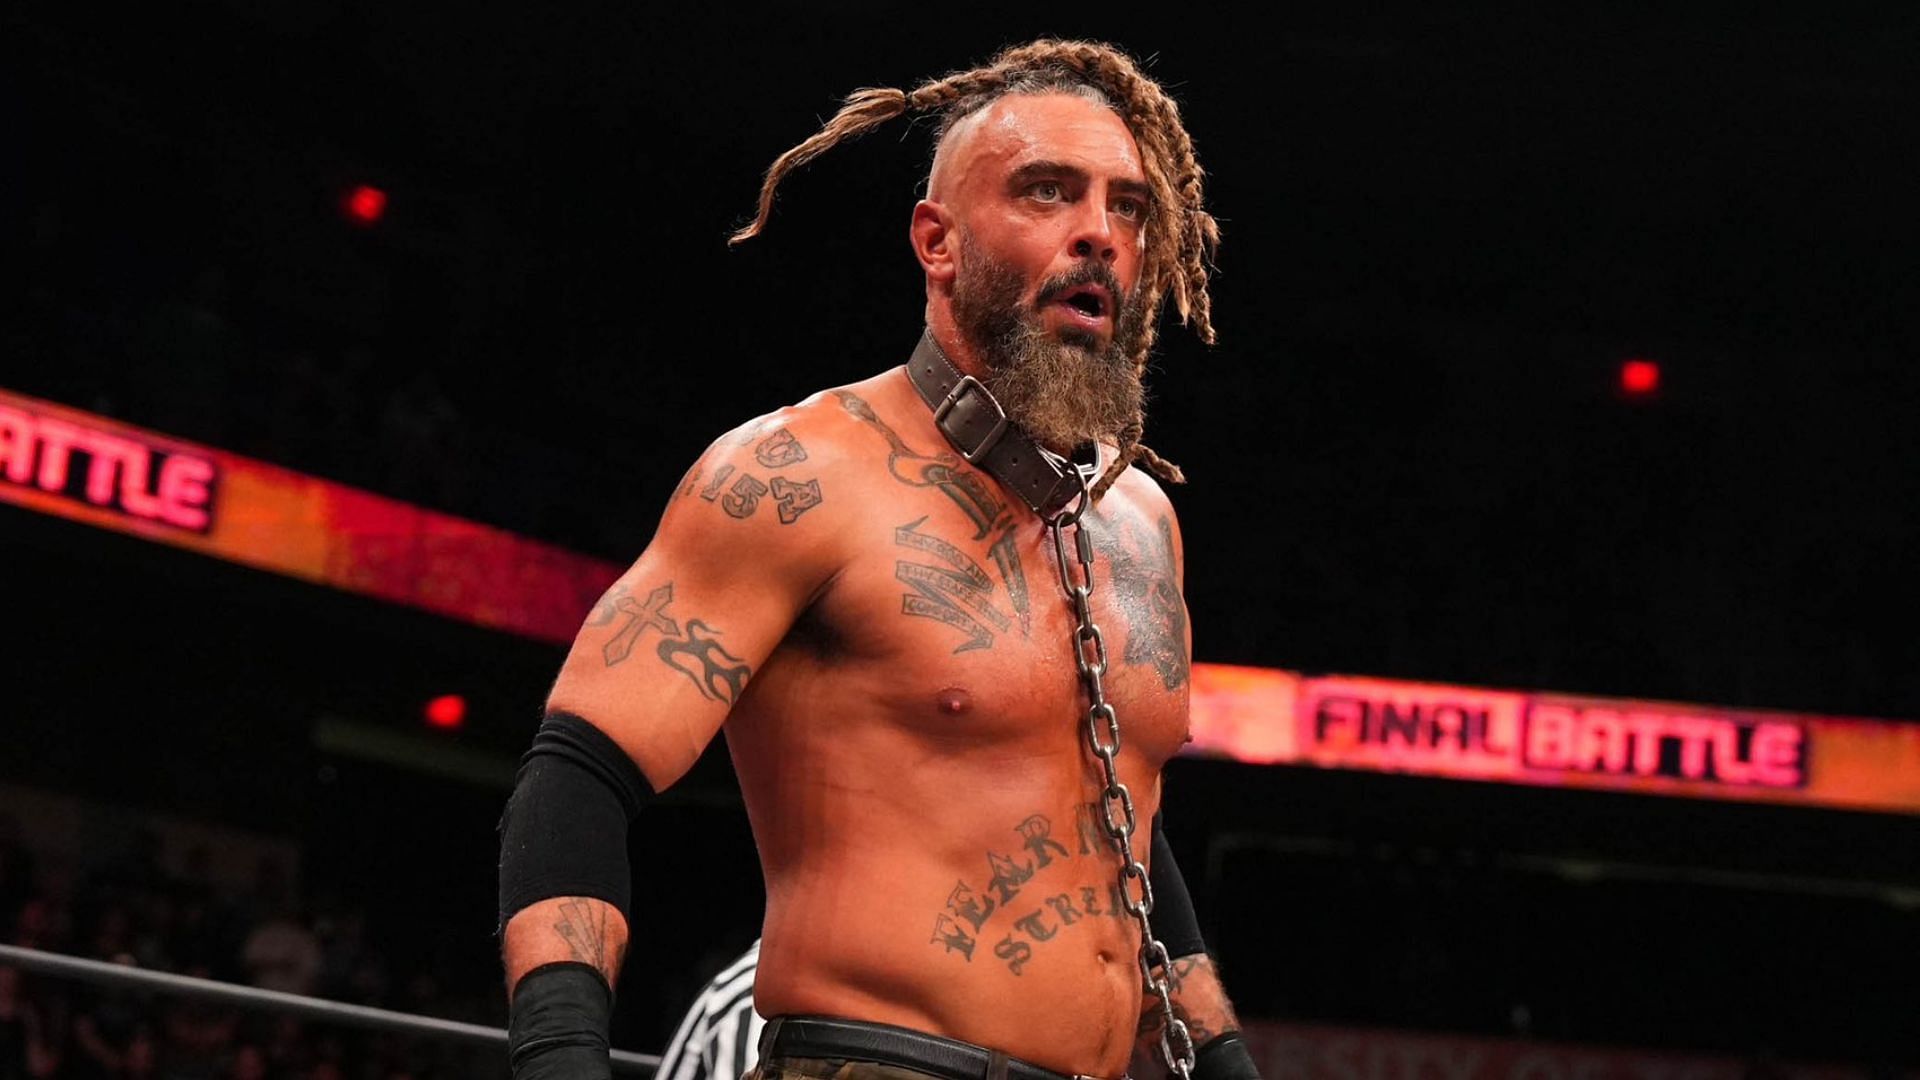 Jay Briscoe is a former ROH World Champion